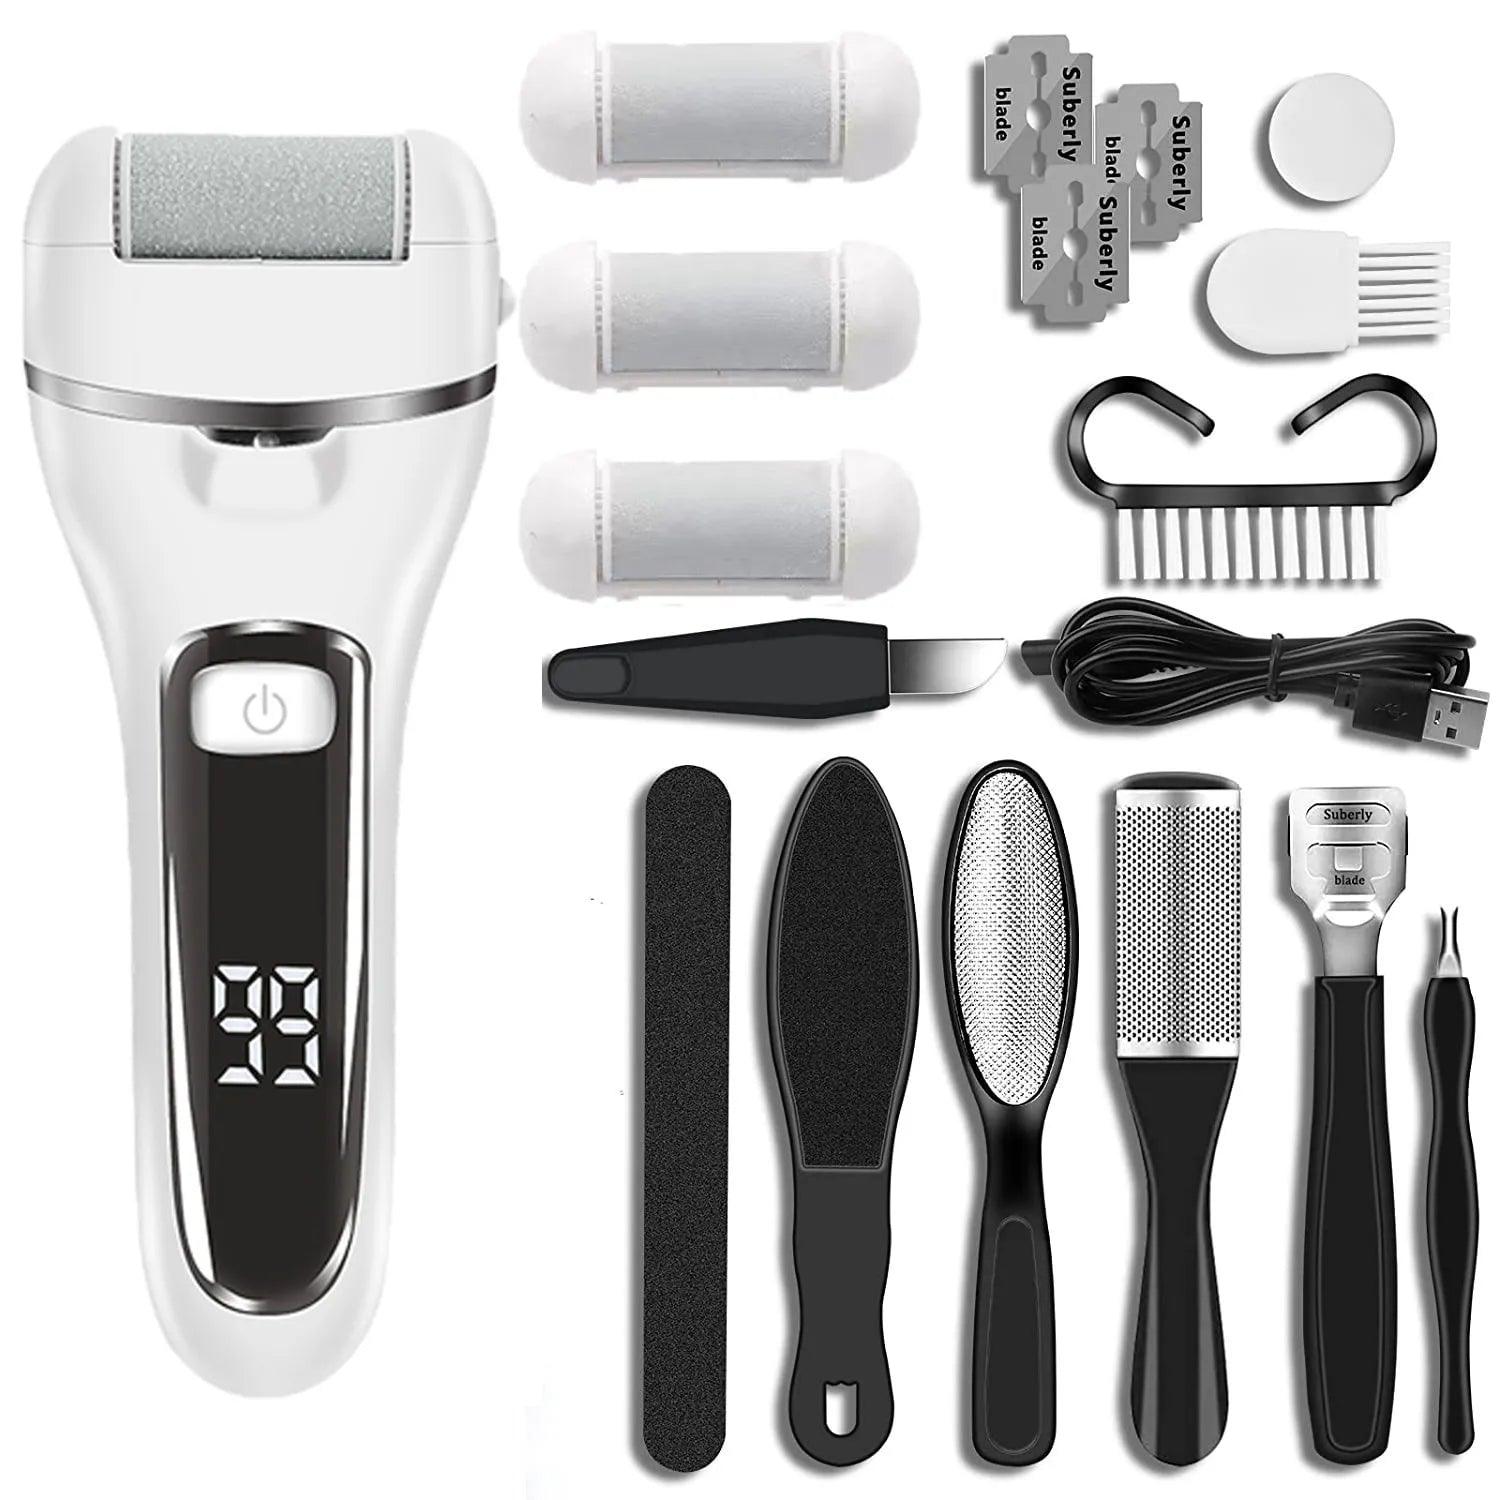 Electric Foot Care Kit with USB Rechargeable Callus Remover - Professional Pedicure Tool for Smooth, Soft Feet  ourlum.com   